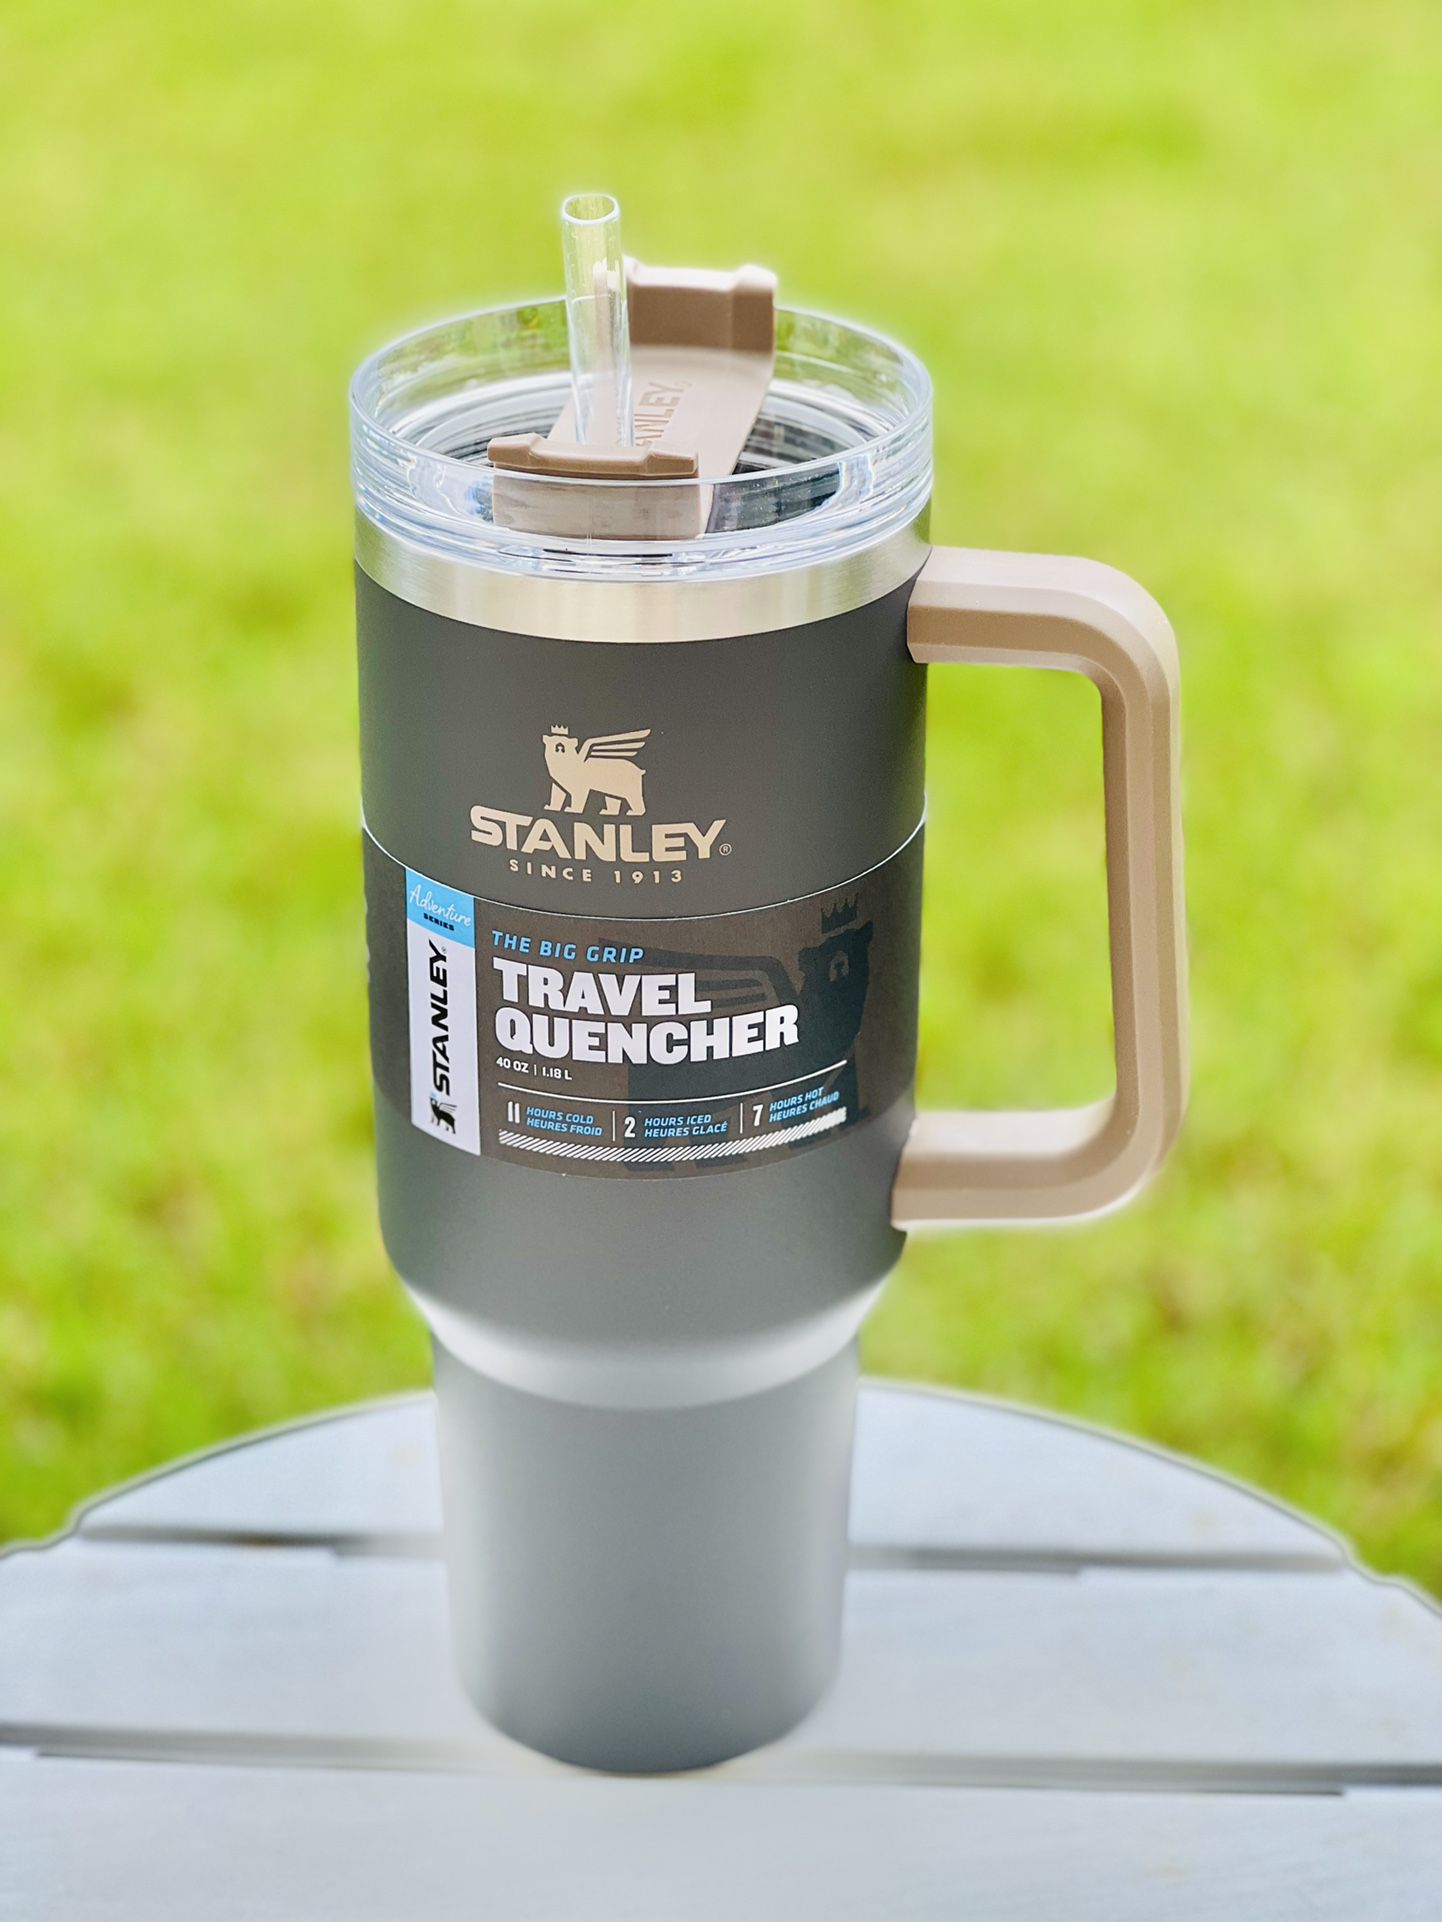 New STANLEY THE QUENCHER H2.0 FLOWSTATE TUMBLER  30 OZ CHAMBRAY BLUE for  Sale in Stroudsburg, PA - OfferUp